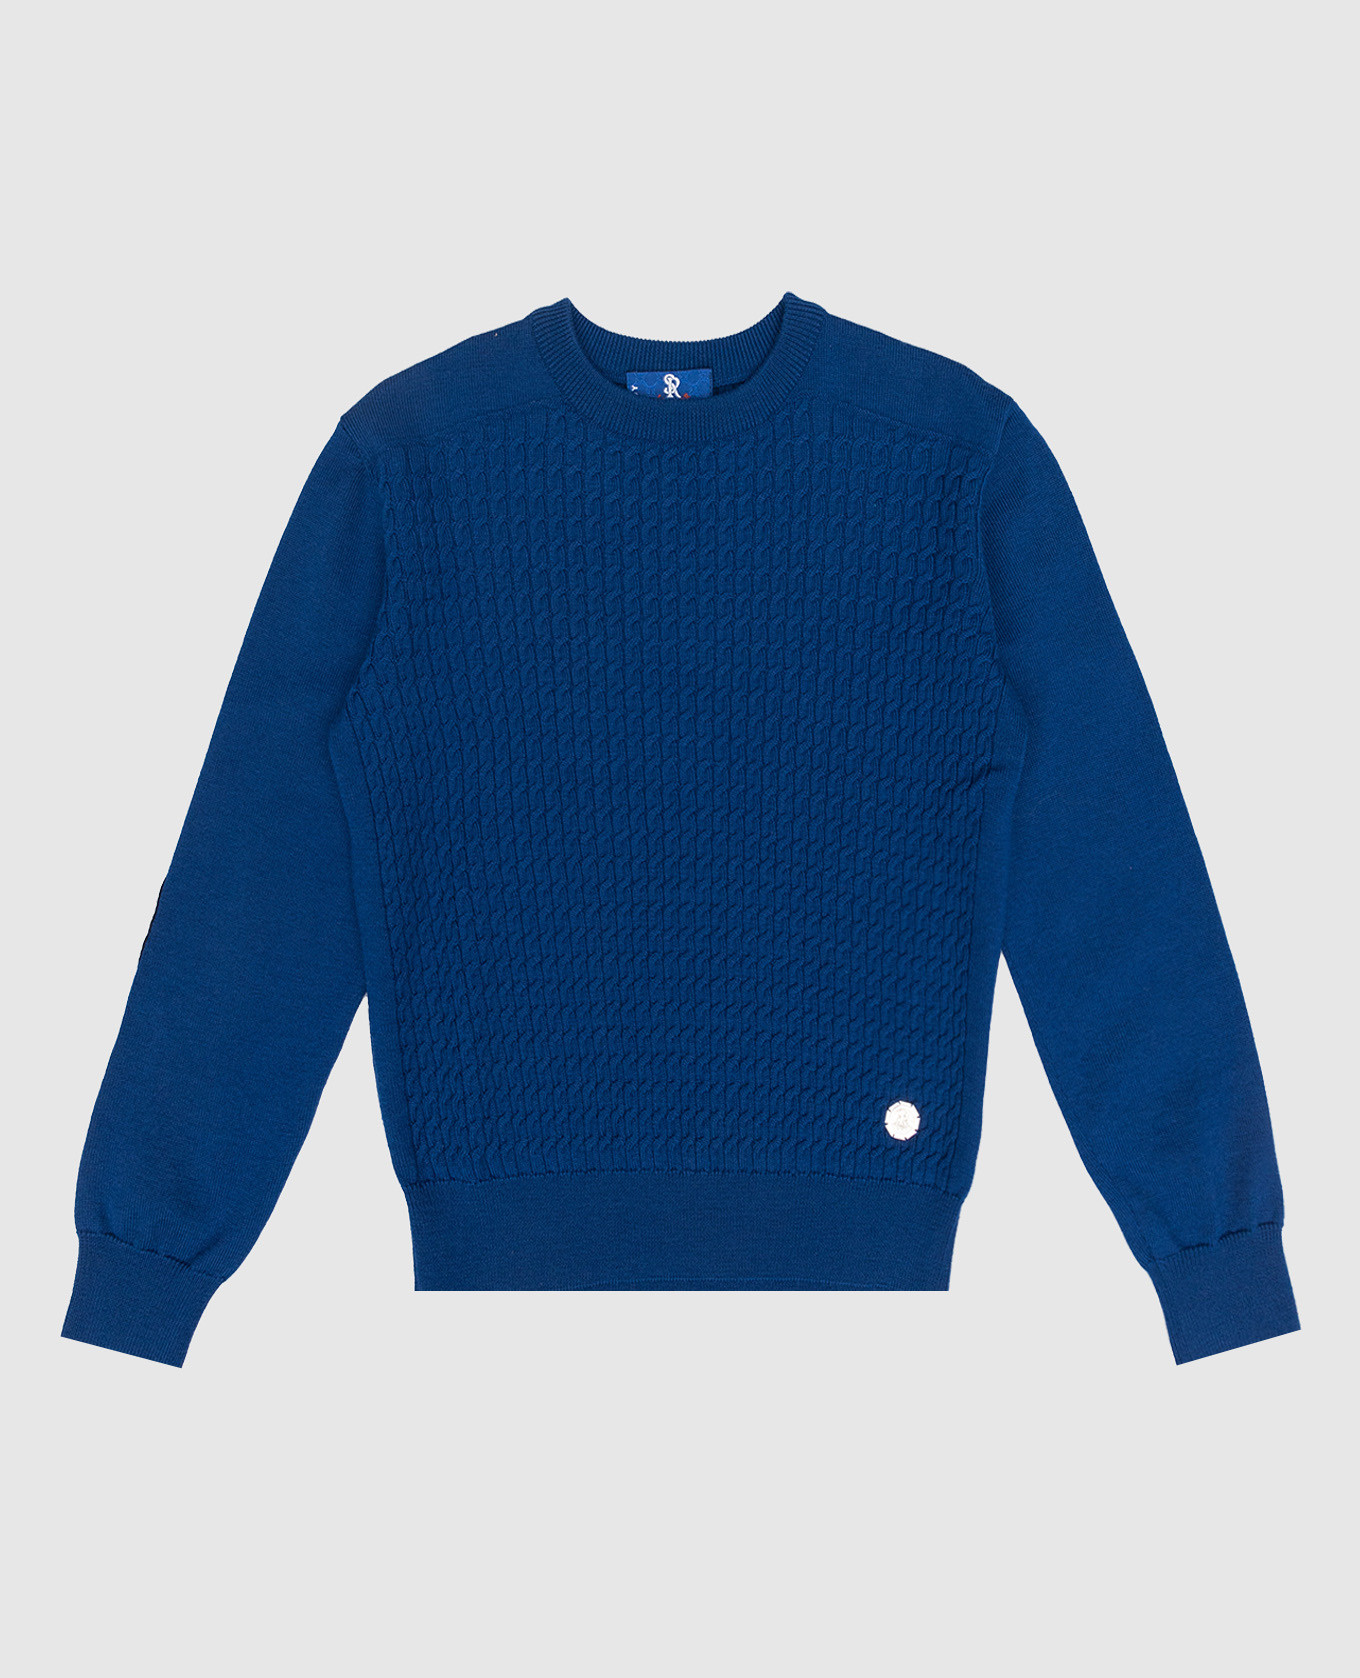 Children's blue jumper made of wool in a textured pattern